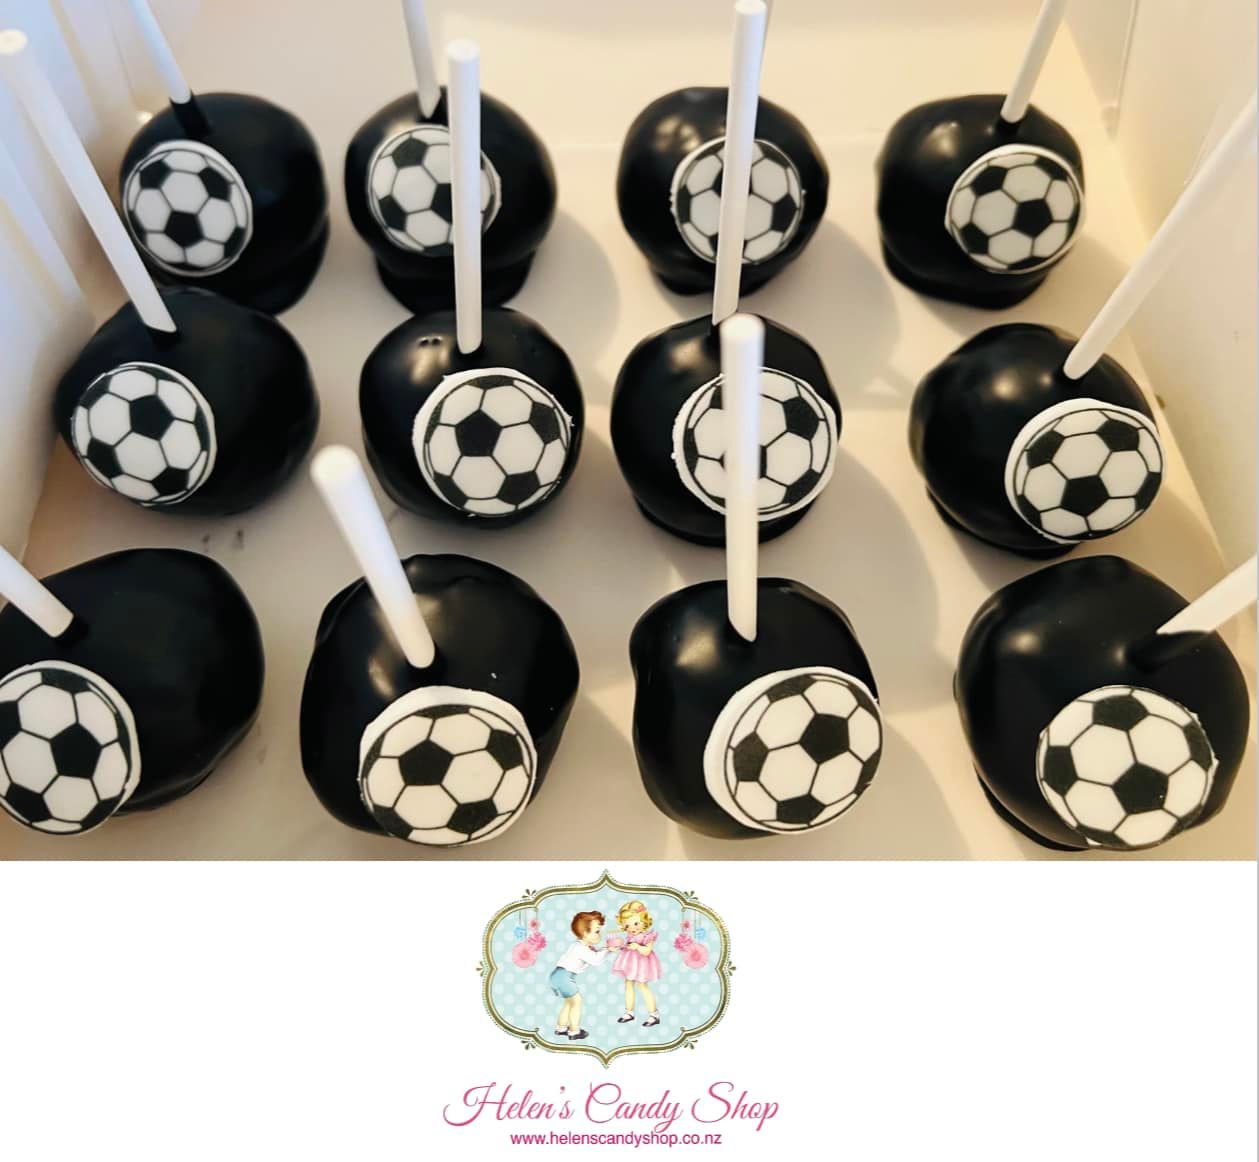 Soccer cake pops for the launch of Randwick City Council's new synthetic  sports field – Popolate